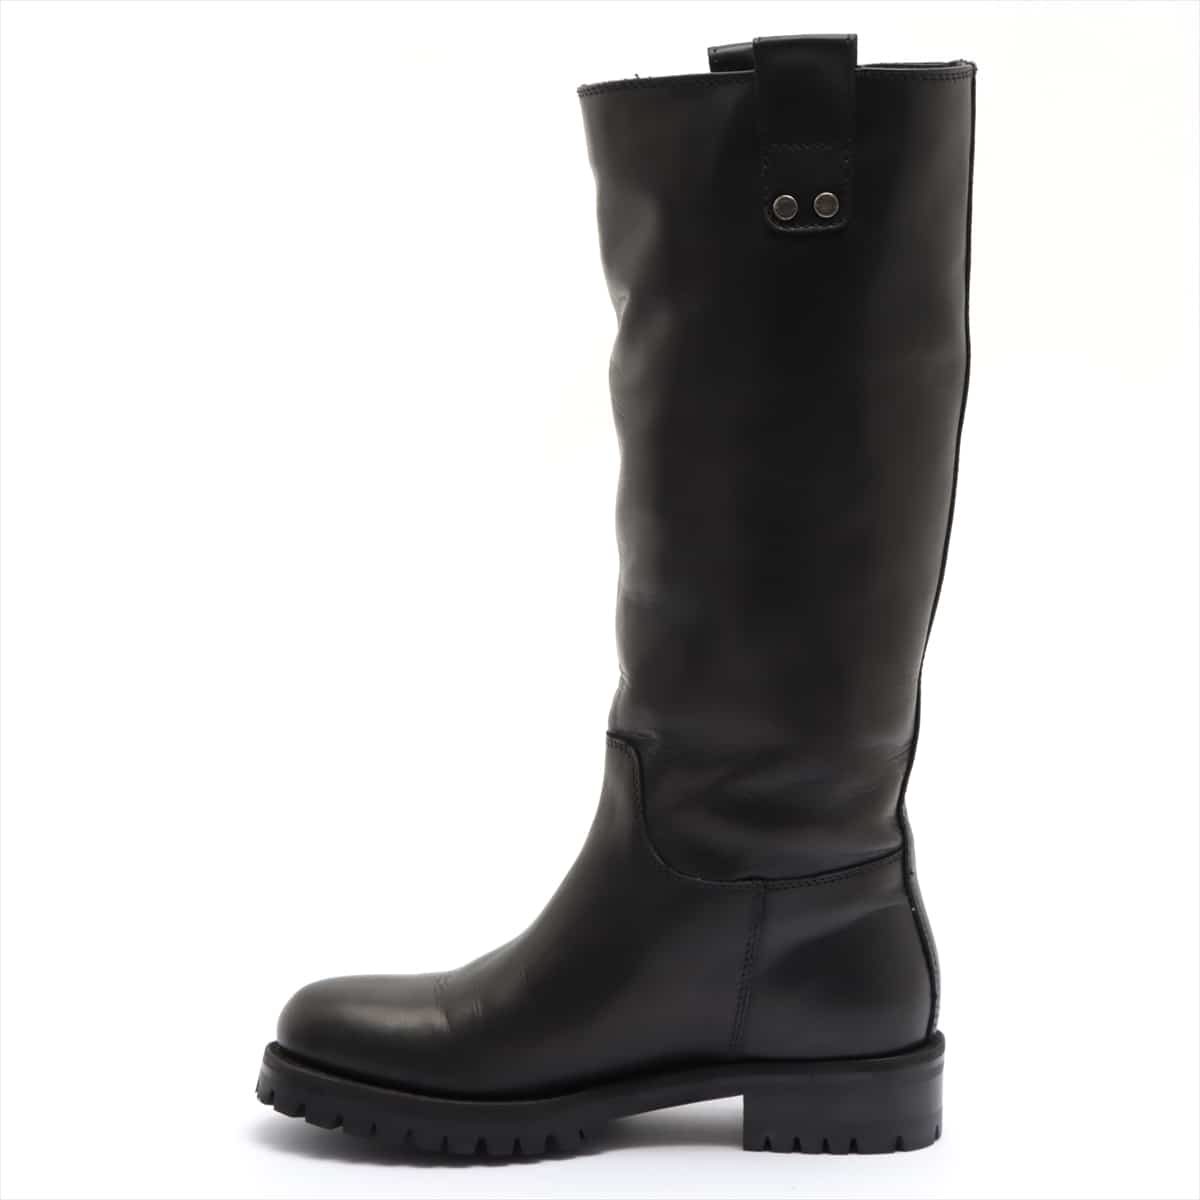 Dolce & Gabbana Leather Long boots 37 Ladies' Black